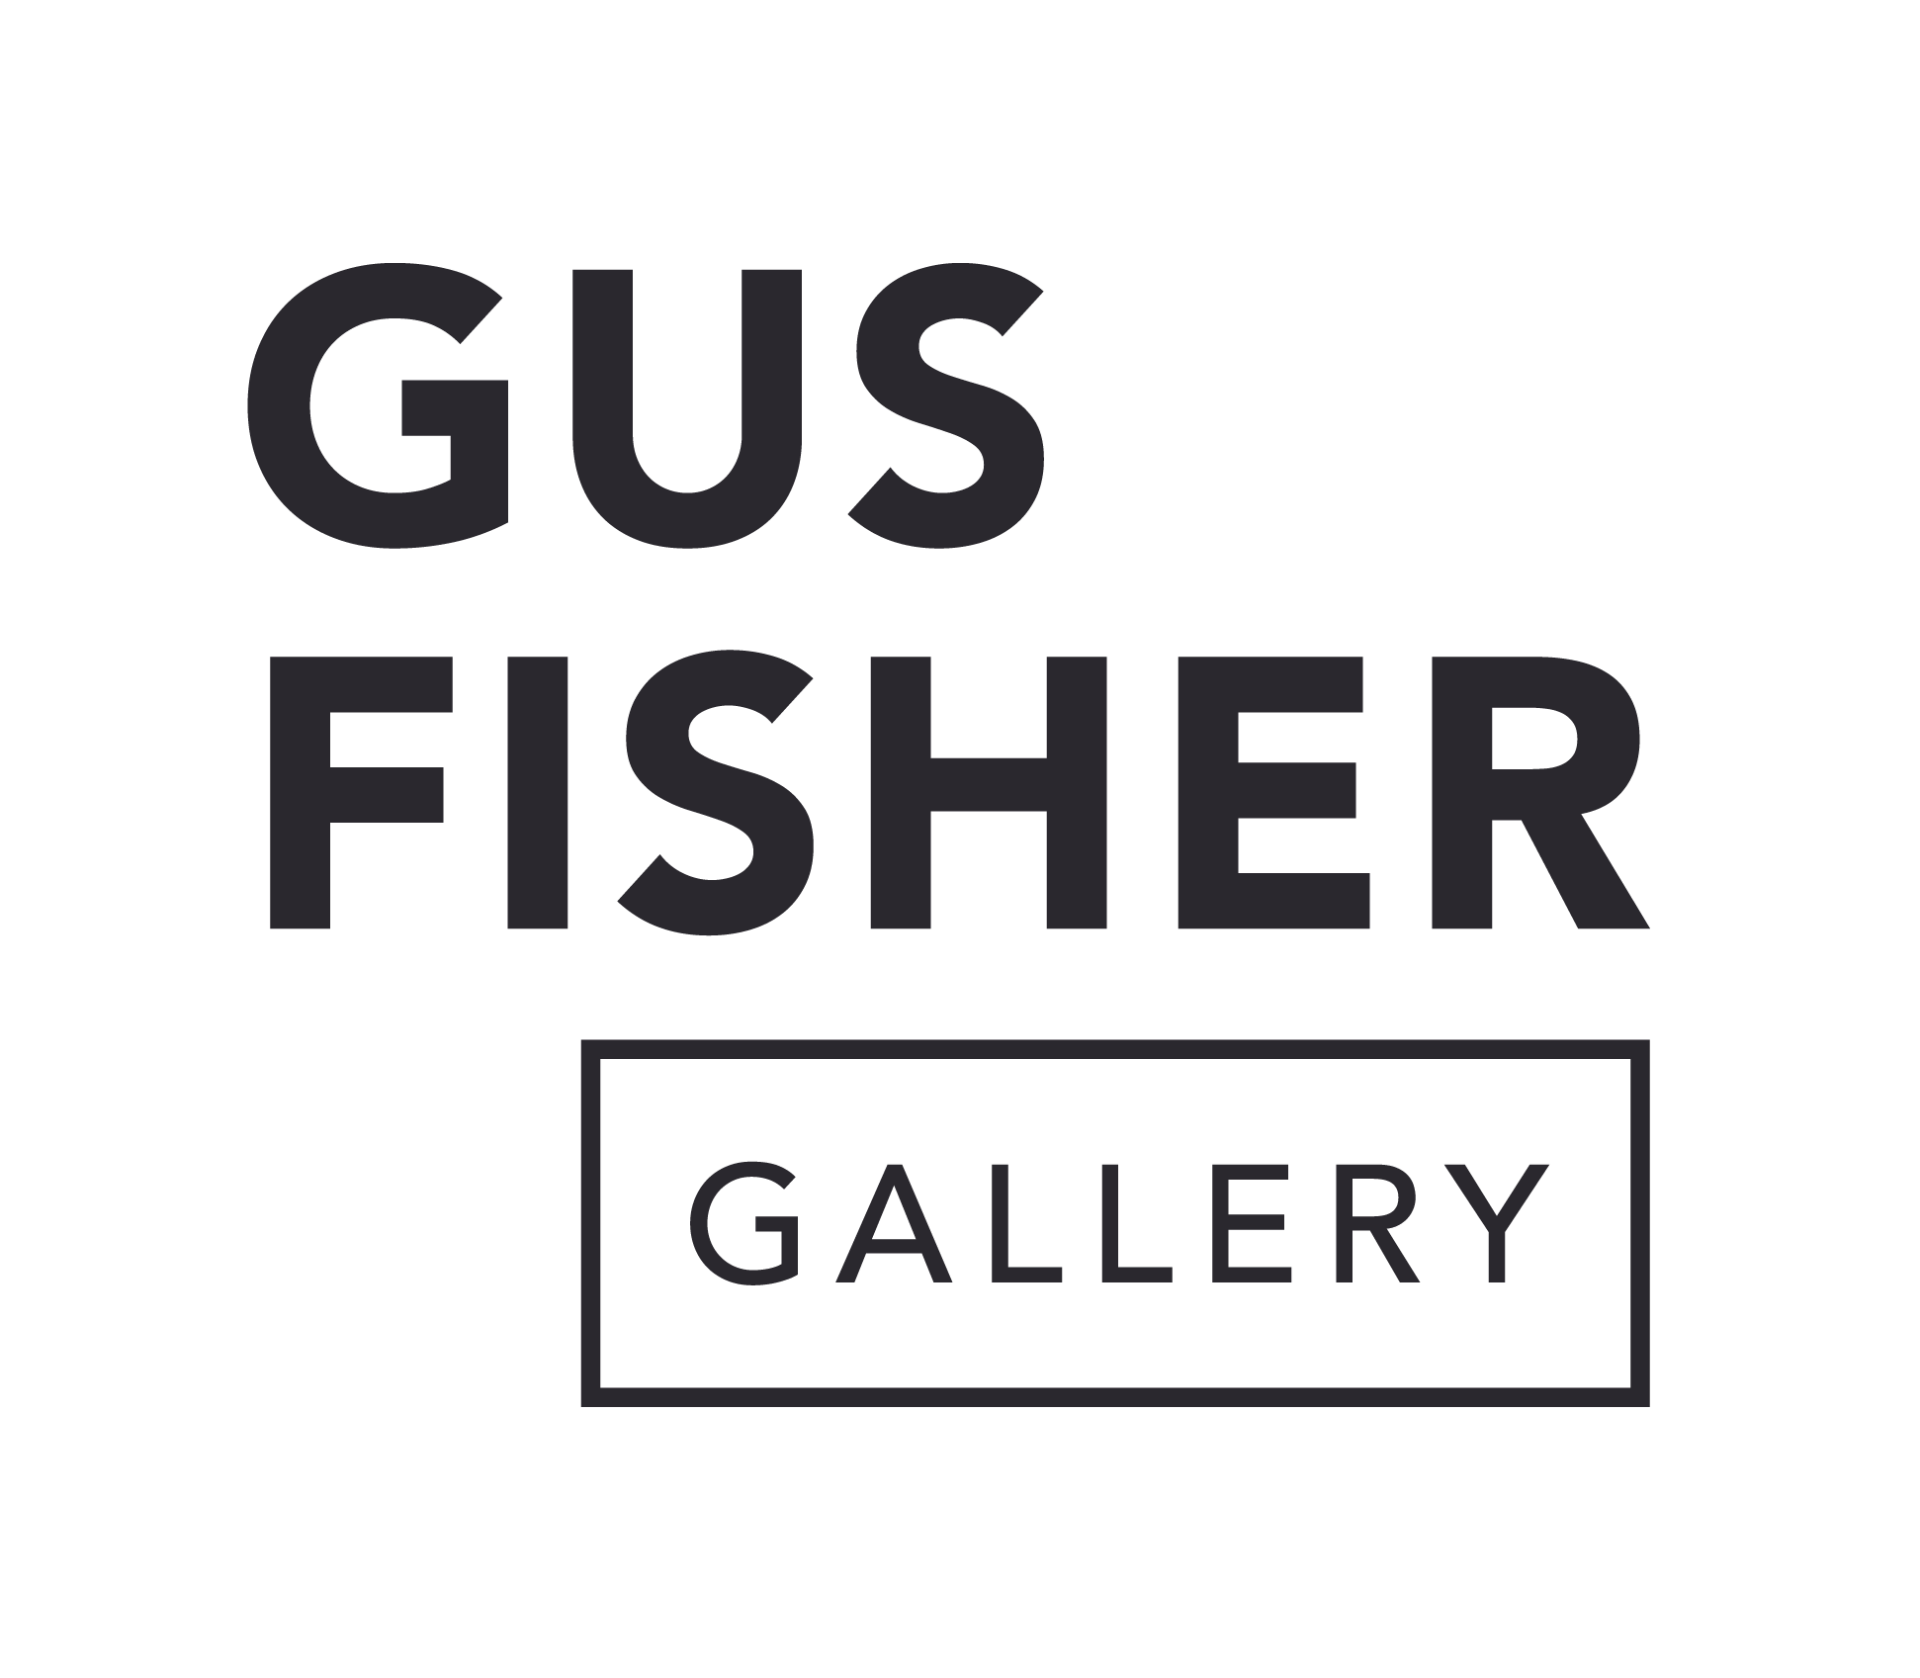 Gus Fisher Gallery logo